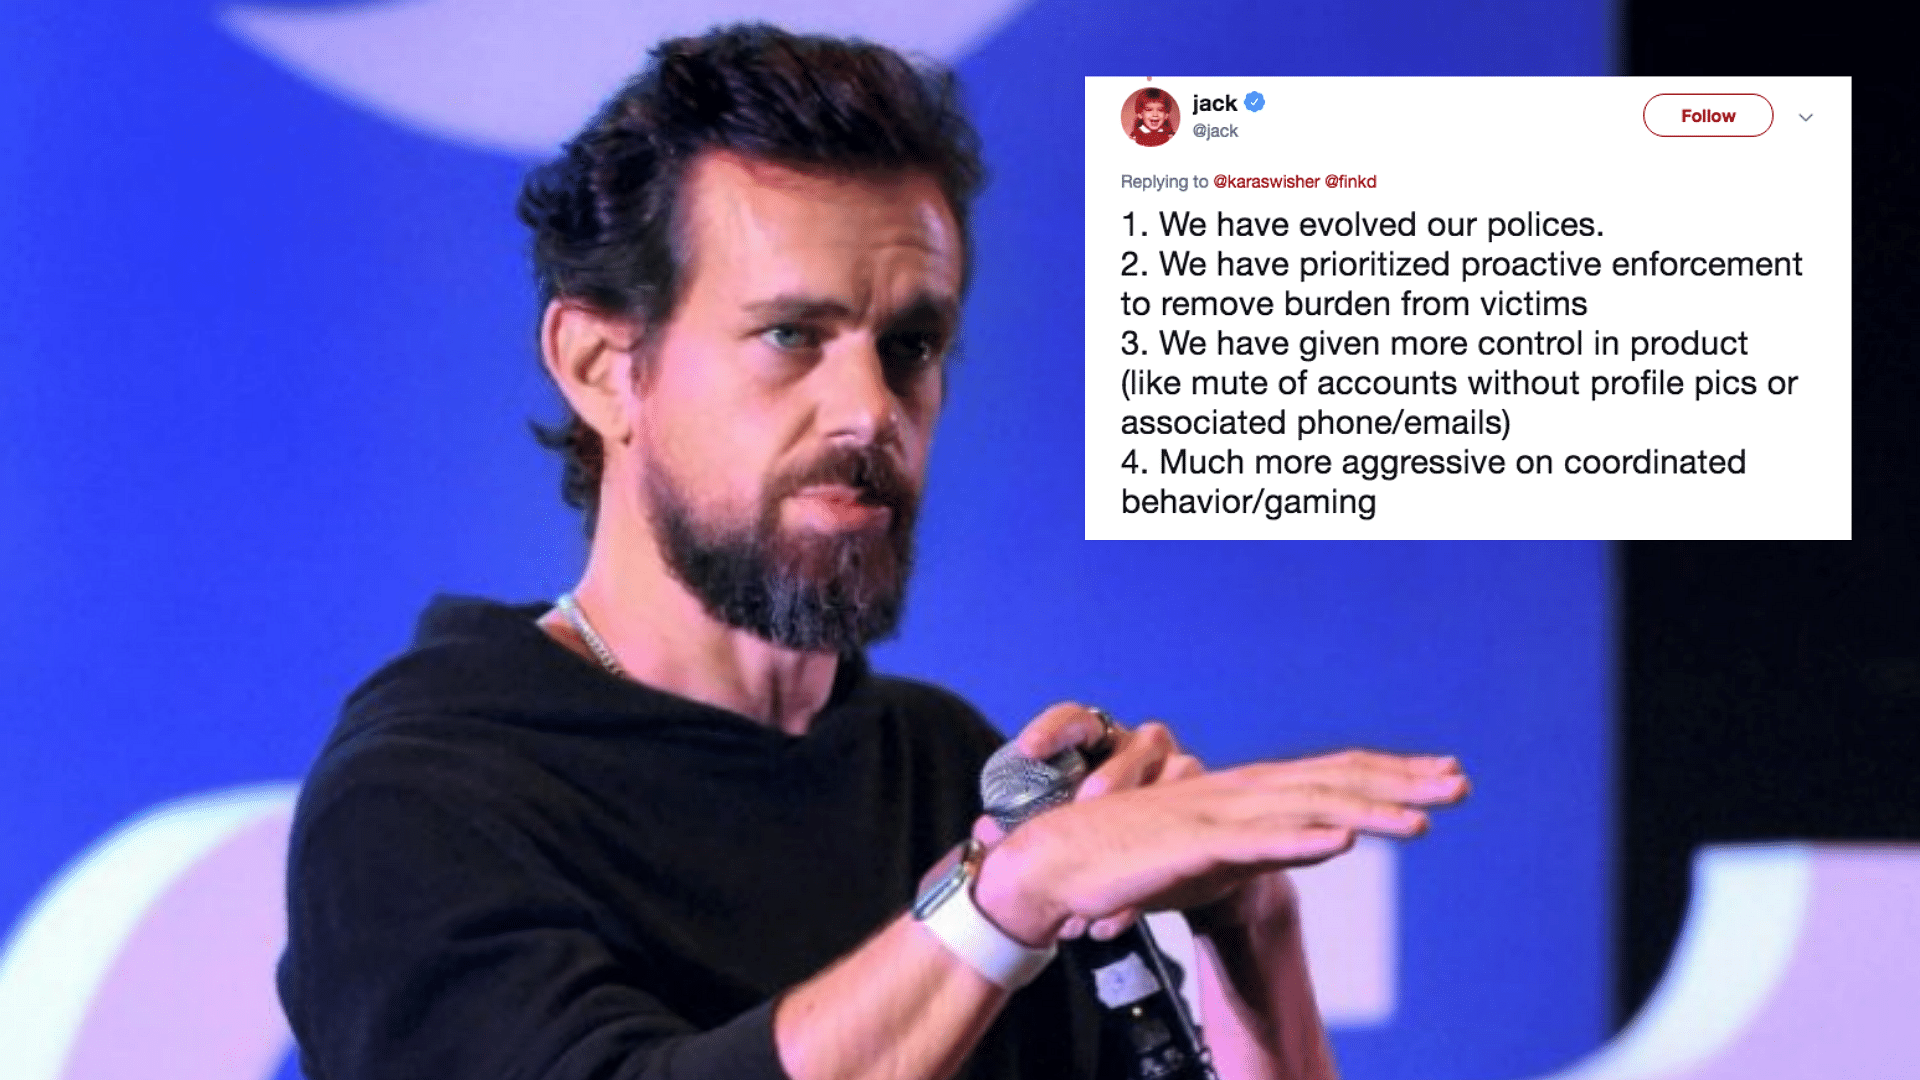 From how Twitter was upholding tech responsibility to why it tolerates trolls, Jack Dorsey answered some tough questions.